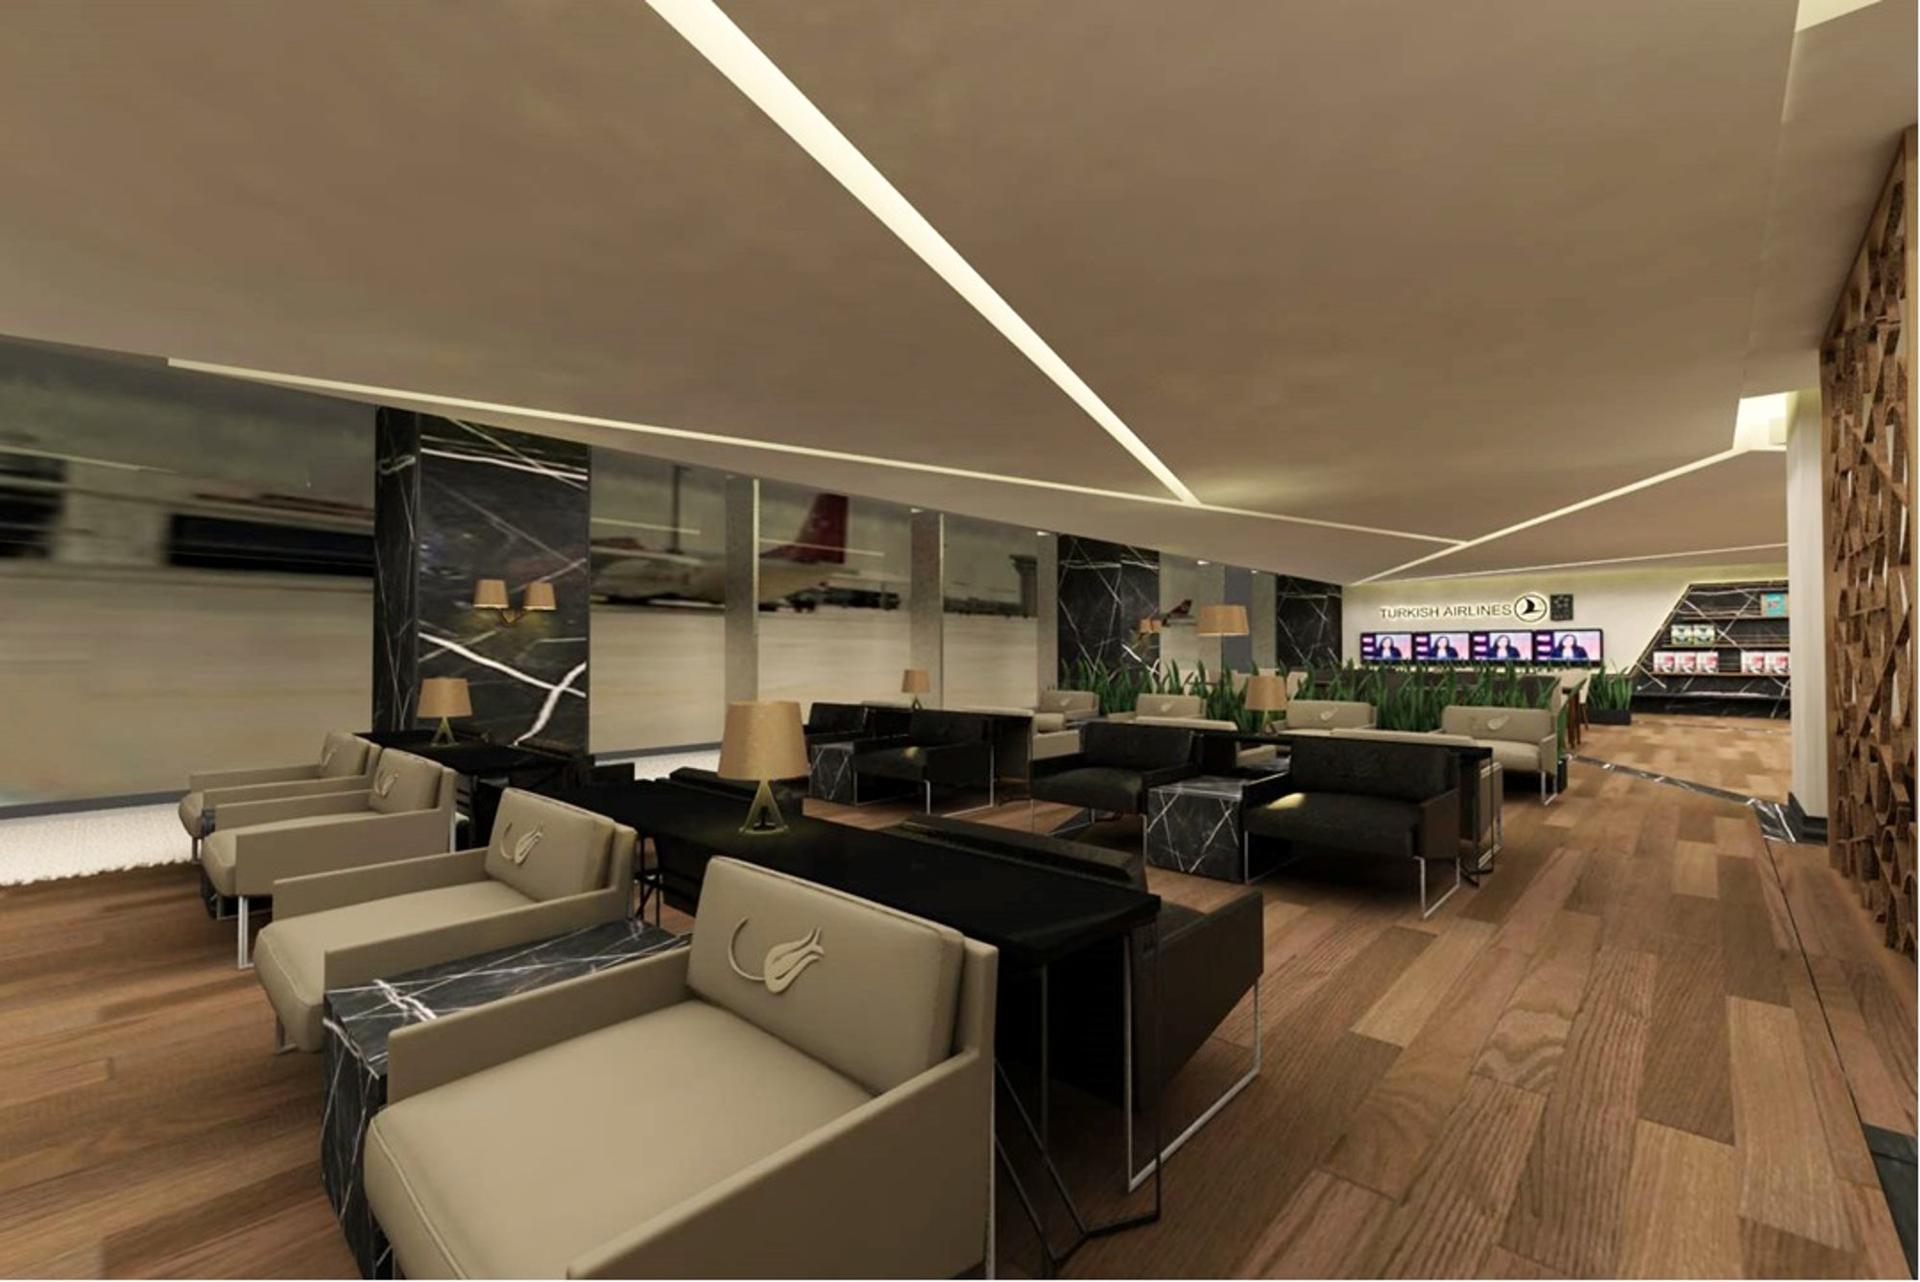 Turkish Airlines CIP Lounge (Business Lounge) image 3 of 27